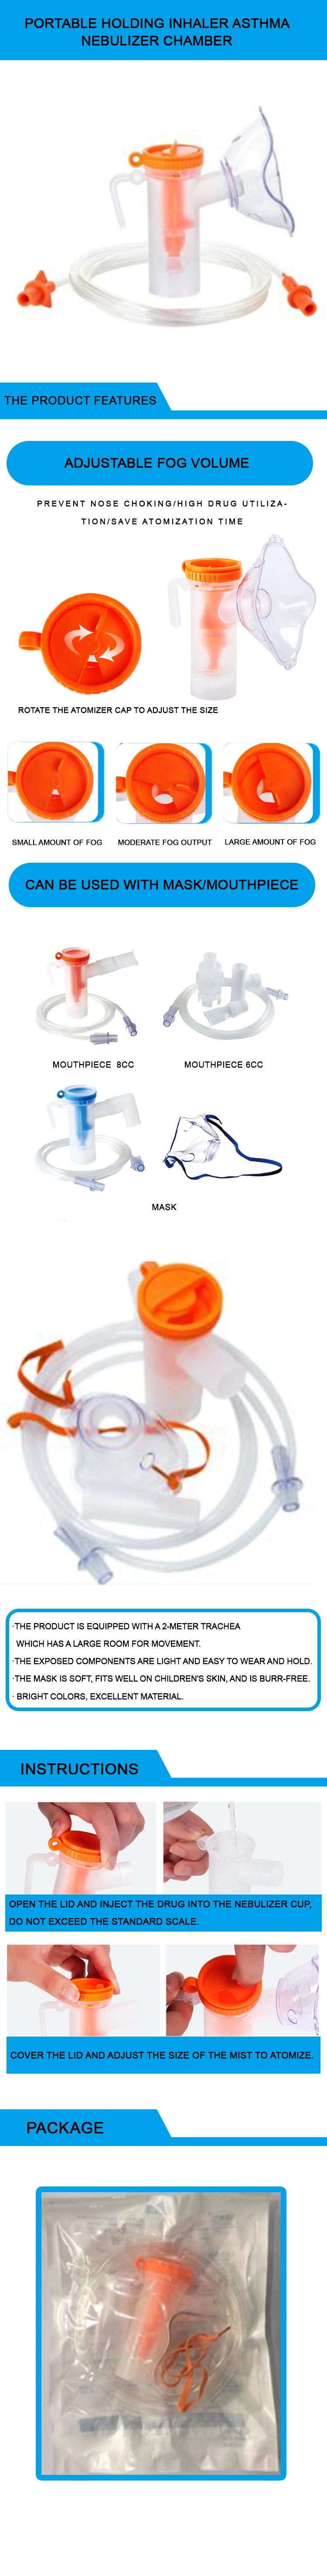 New Aerosol Chamber Inhaler Spacer with Medical Dose Mdi Spacer Aerochamber for Asthma Therapy